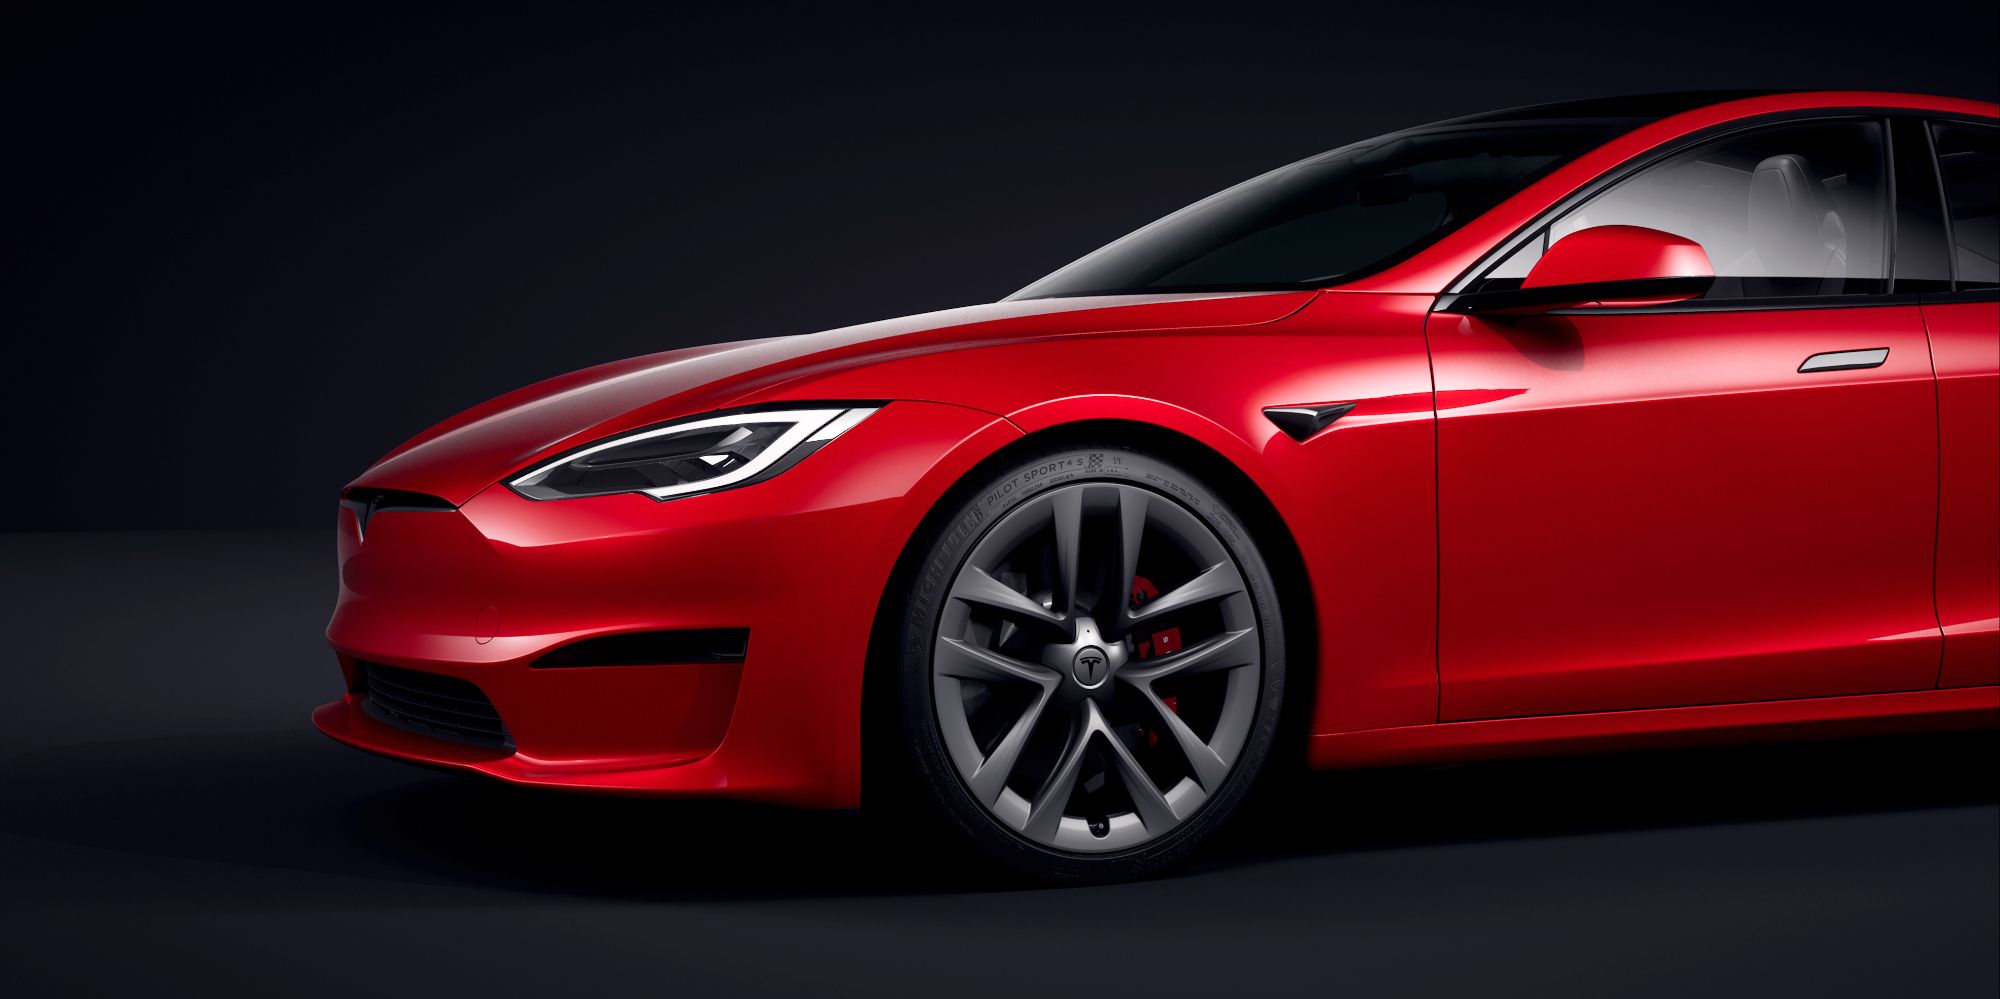 The front of a red Tesla Model S